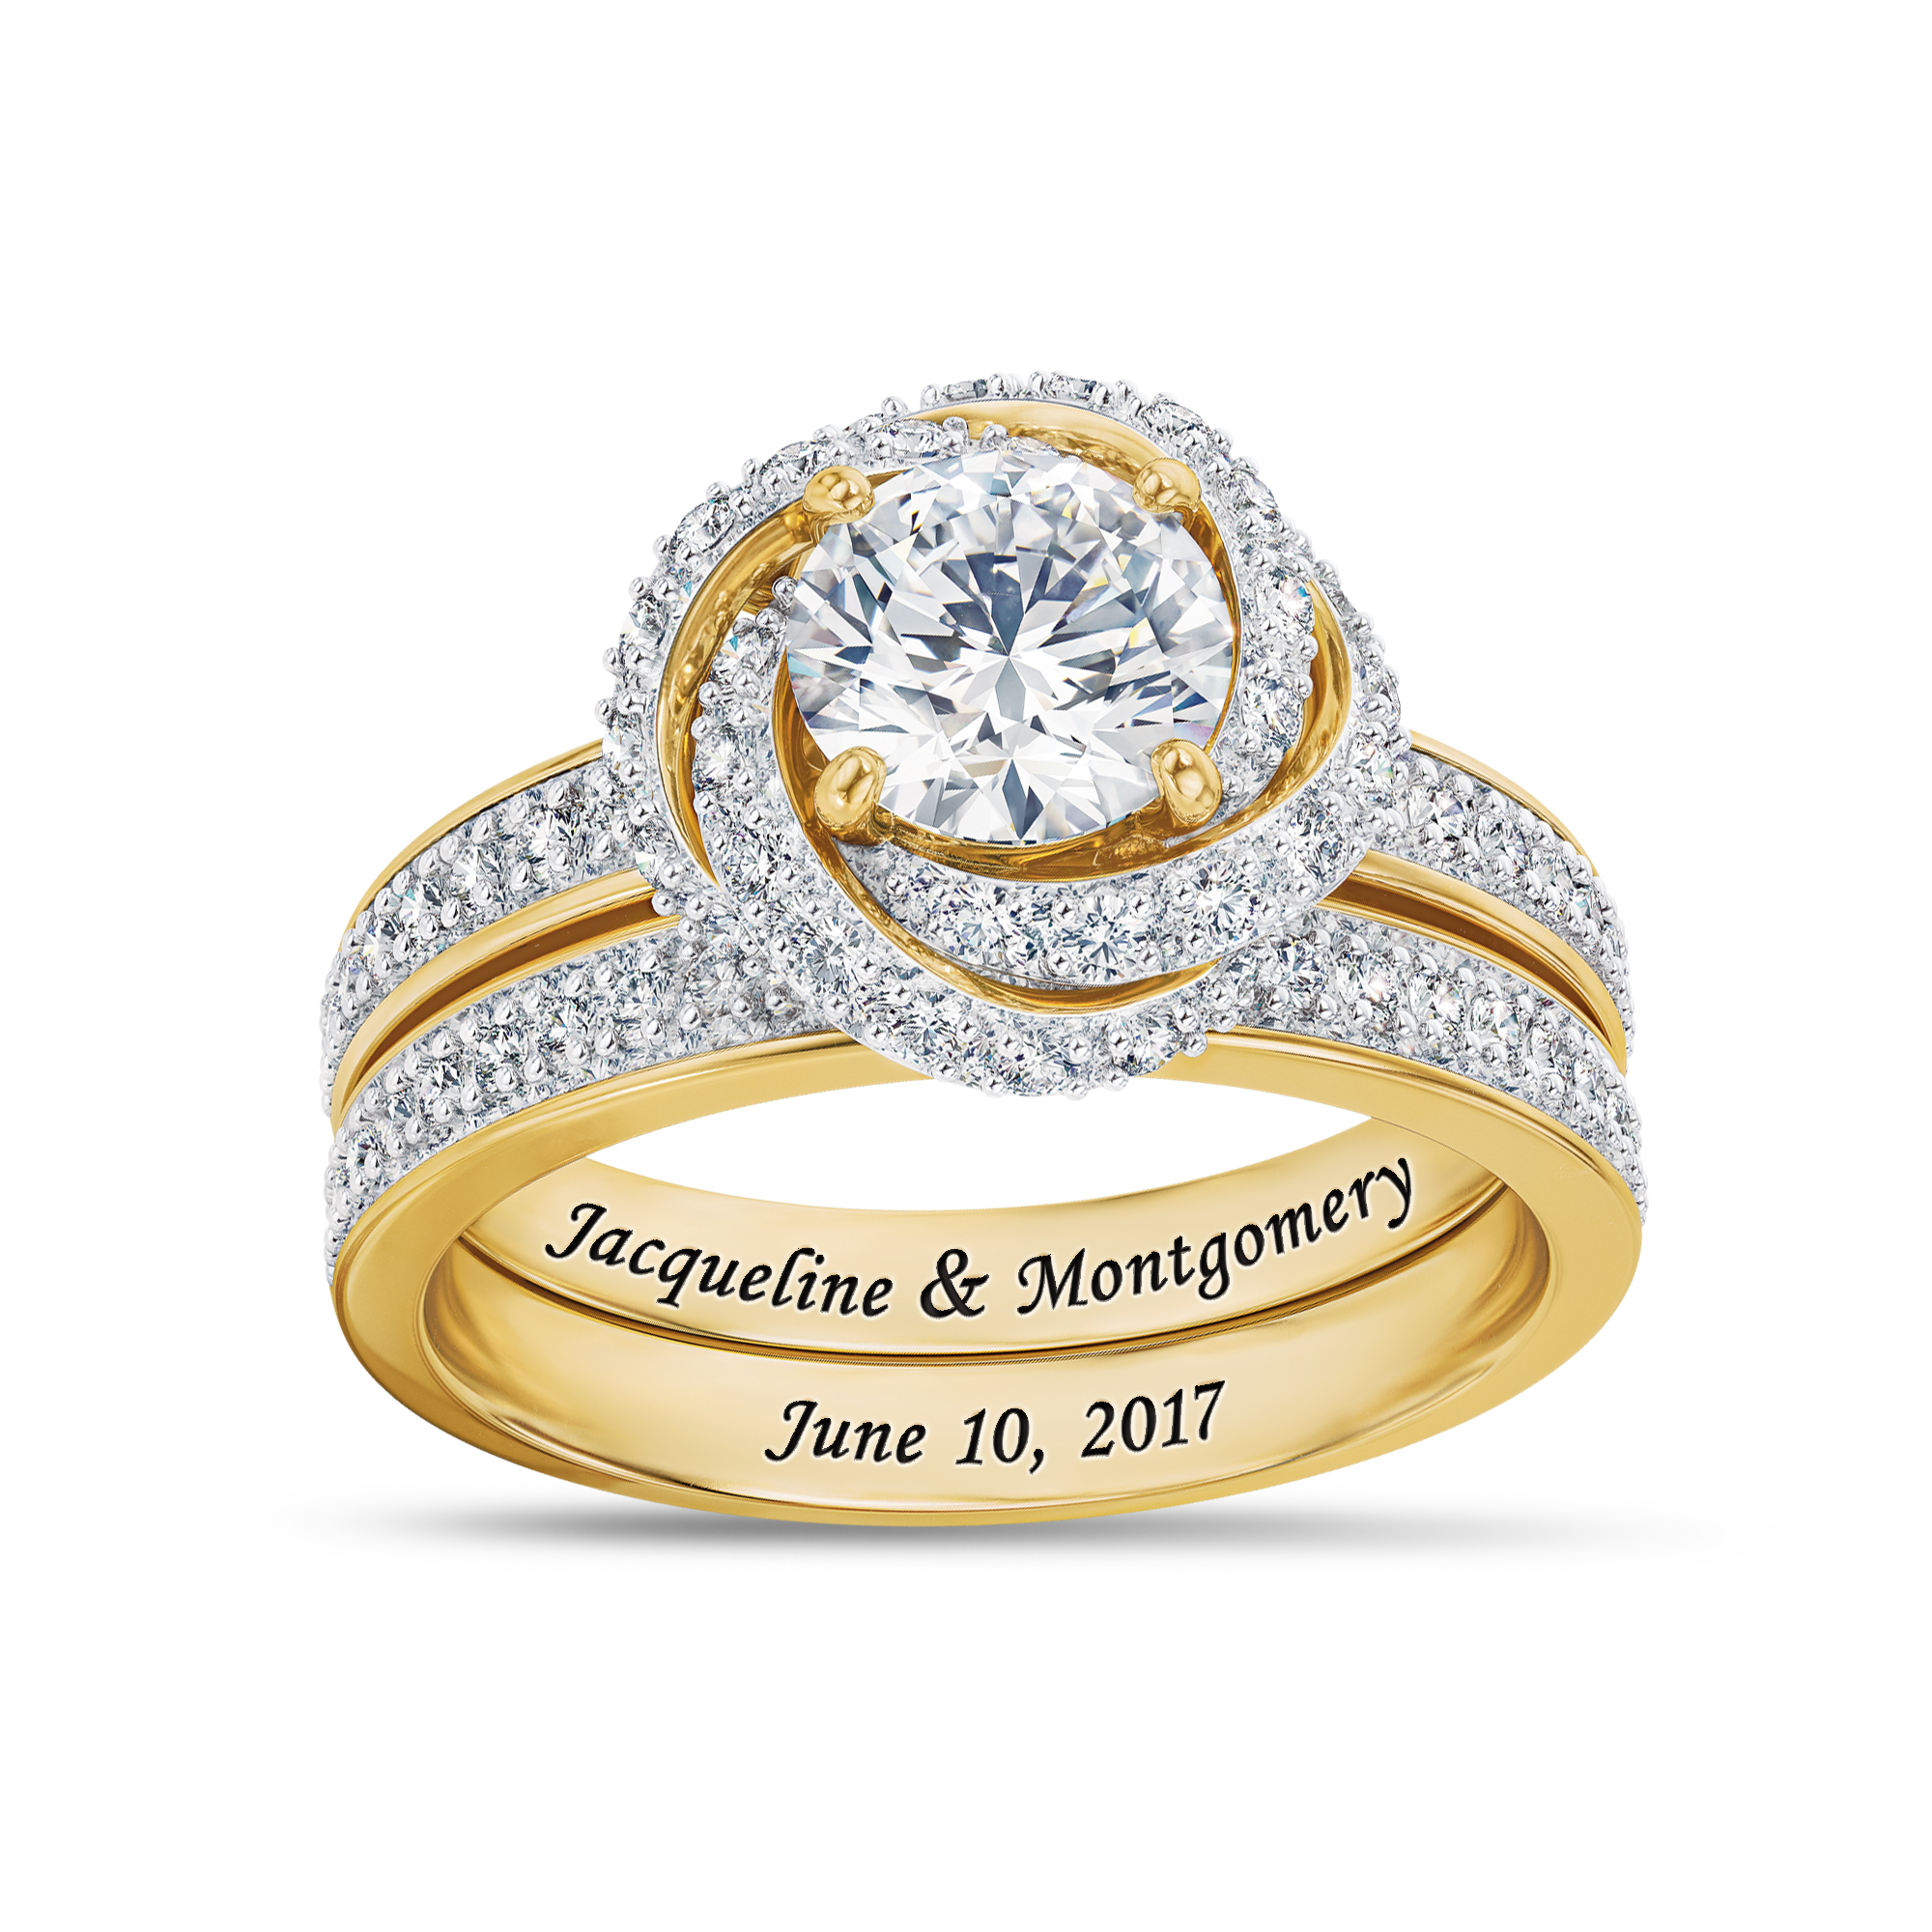 Waman Hari Pethe Sons - Single stone gold diamond #ring from our  collection. View more here: http://bit.ly/1qmNw1b #Jewellerycollection  #finejewellery #diamondring #goldring #ings #diamondjewellery  #indianjewellery #ethnicjewellery #wedding ...